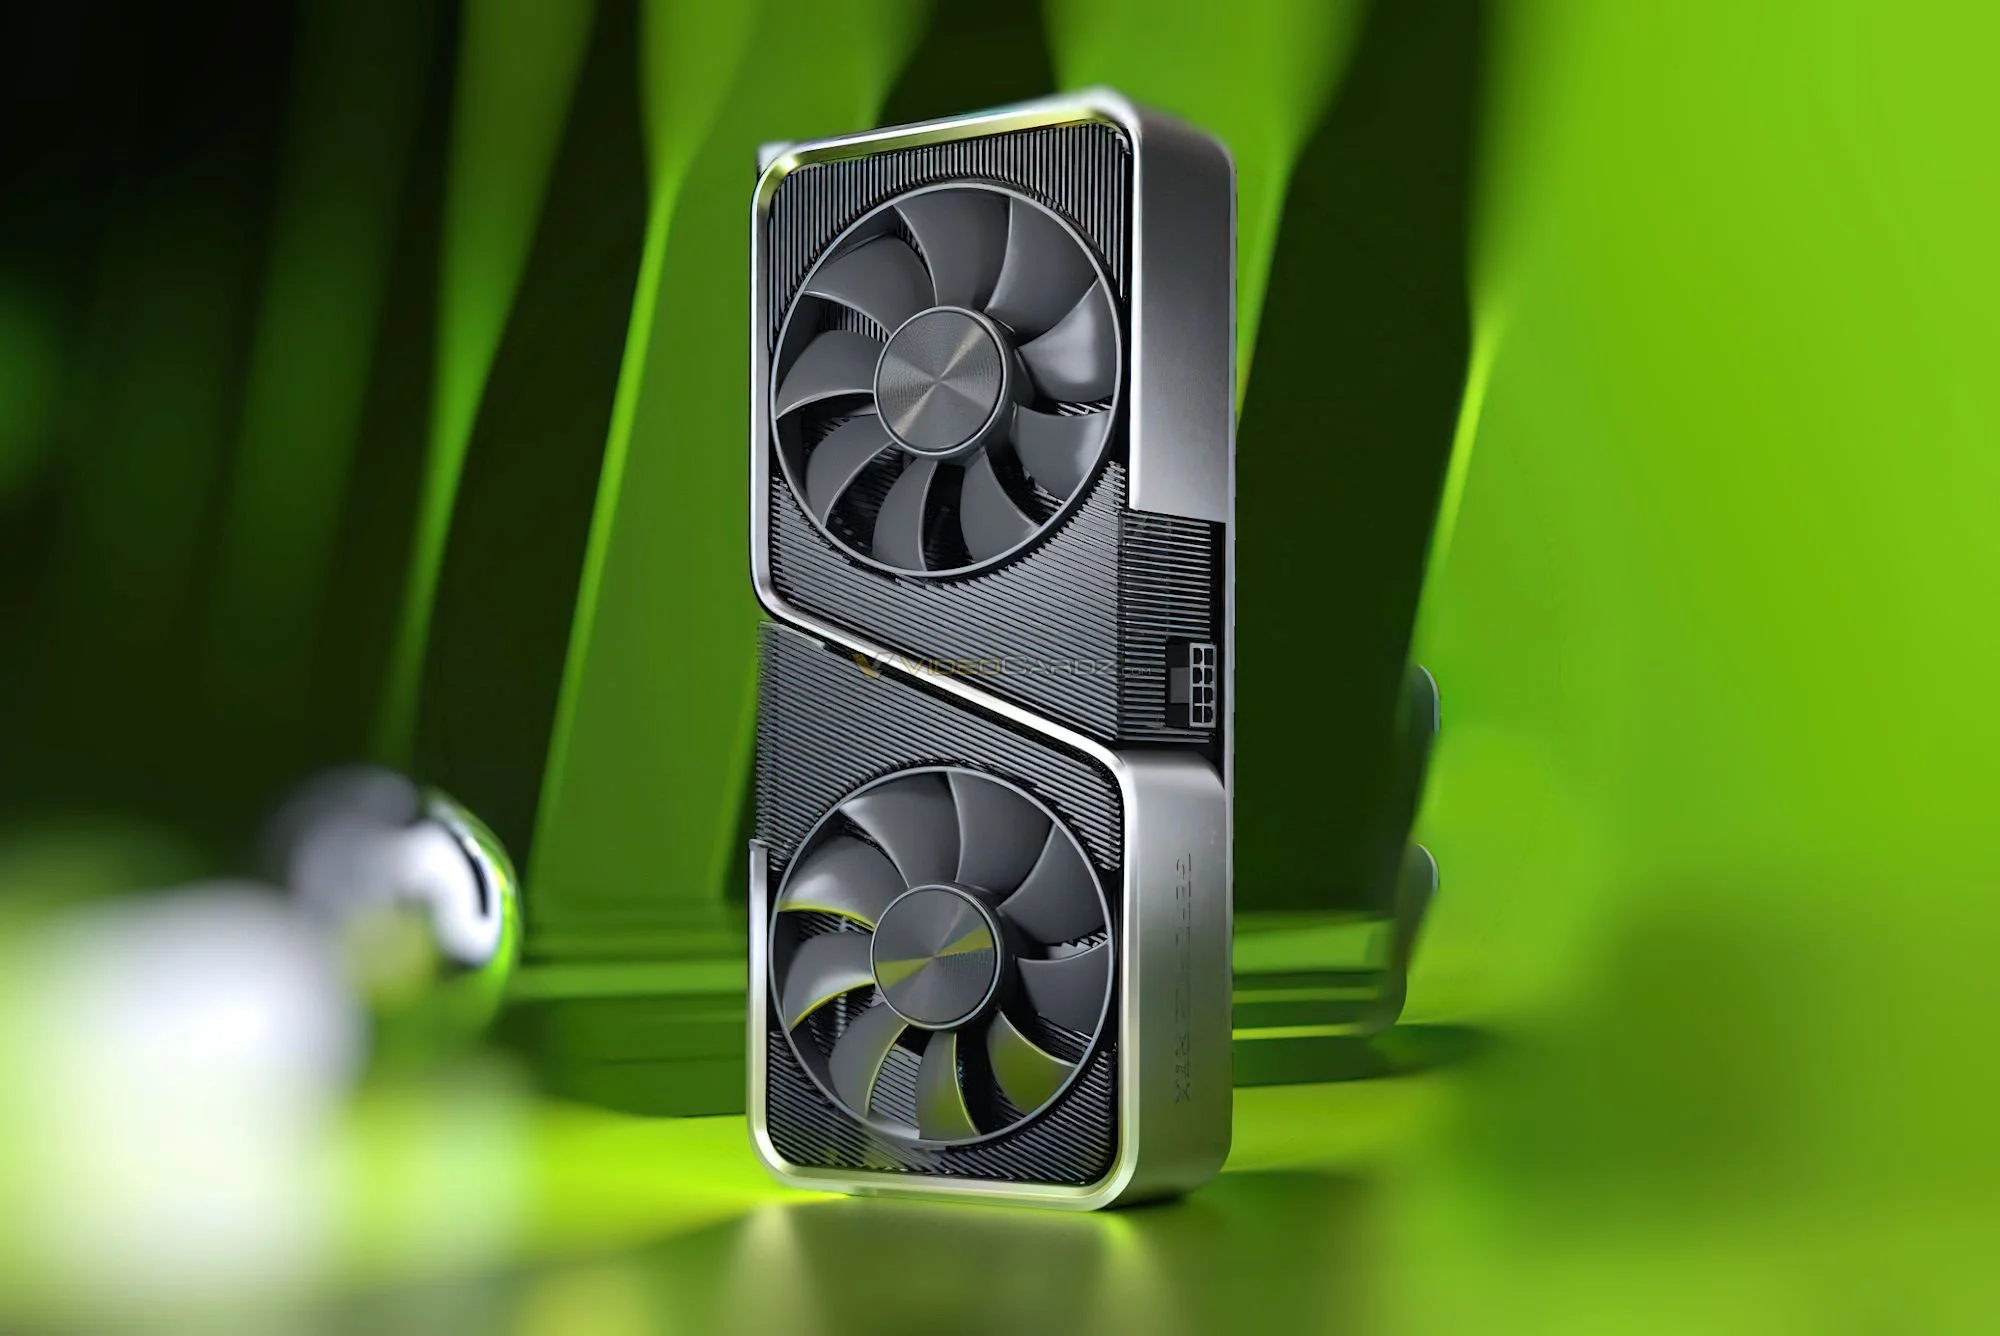 NVIDIA might launch the RTX 4060 earlier than the announced date